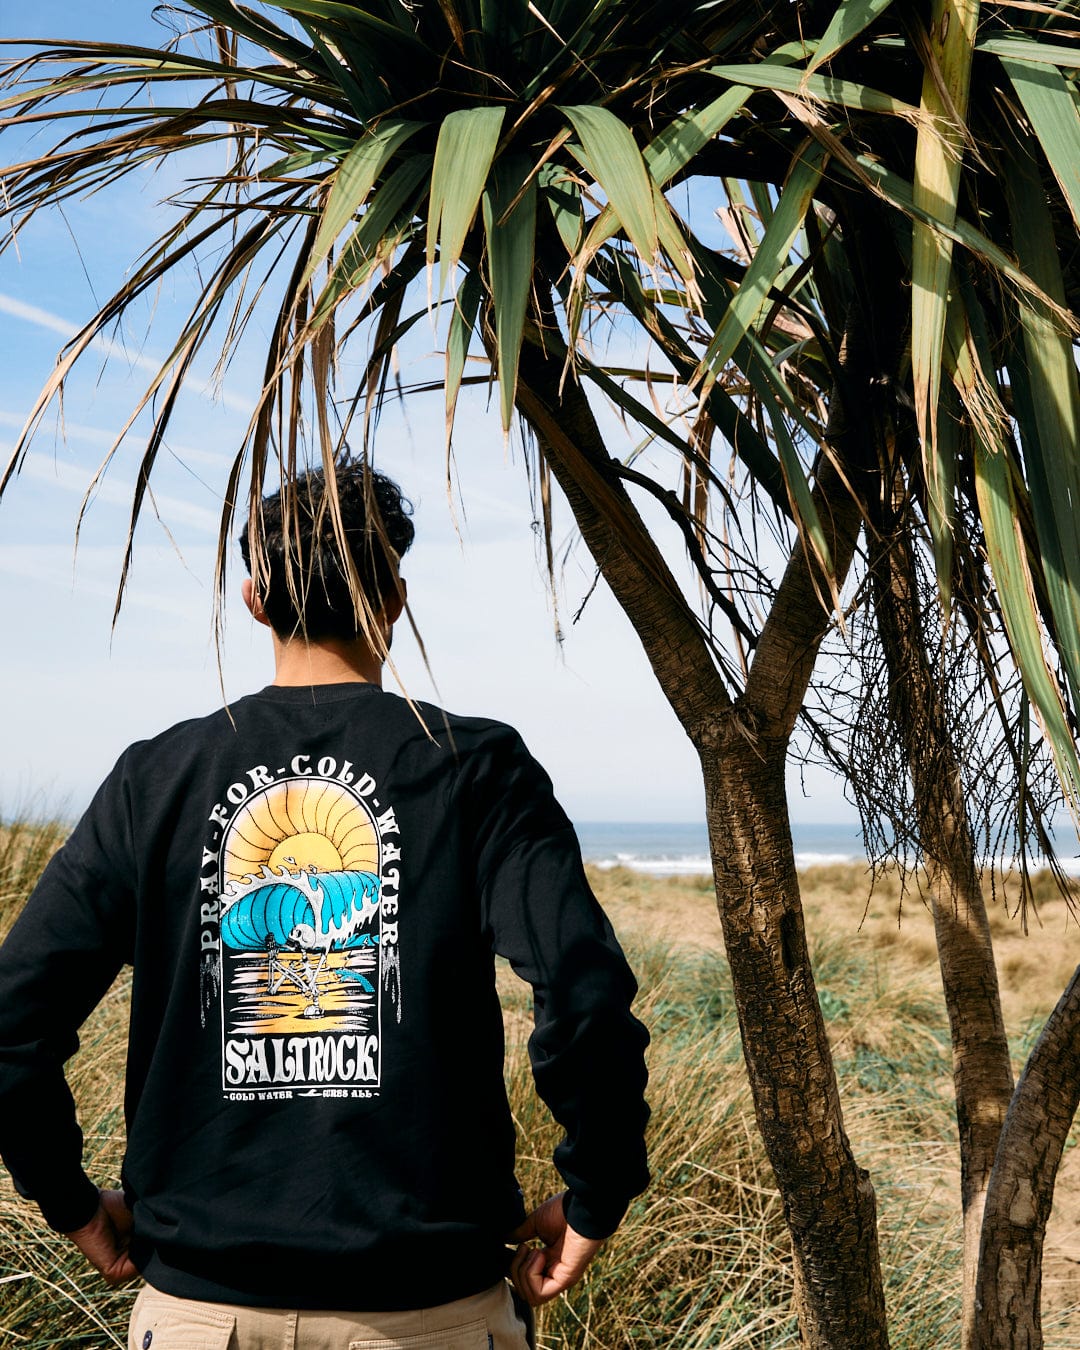 A person wearing a Saltrock Cold Water - Mens Oversized Sweat - Black stands facing the ocean, partially obscured by a palm tree in the foreground.